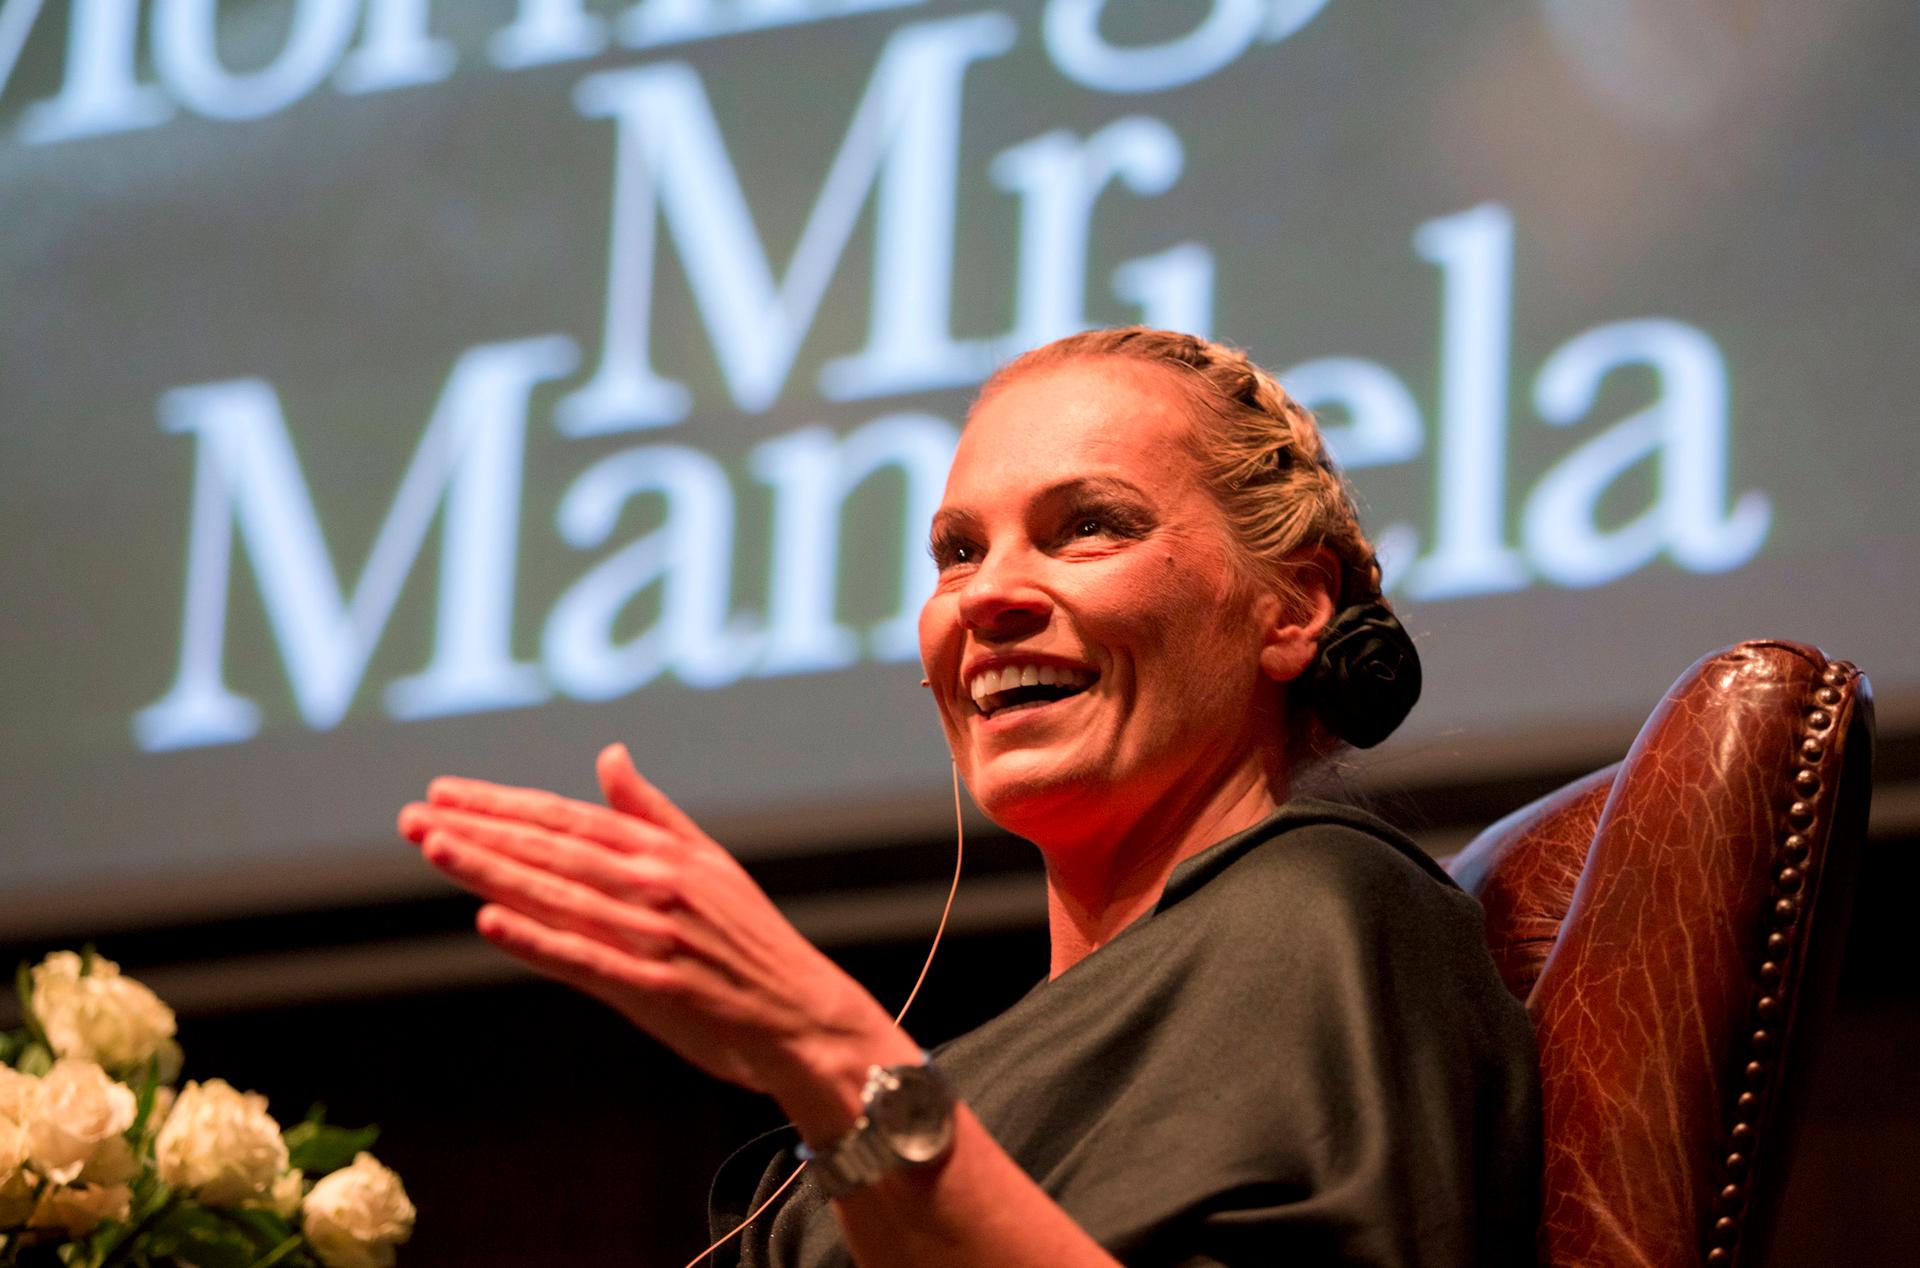 Nelson Mandela's former private assistant Zelda la Grange. Her memoir traces the 43-year-old's upbringing in an Afrikaans family that considered Mandela a terrorist to her improbable appointment to his office when he became president in 1994, and her clos